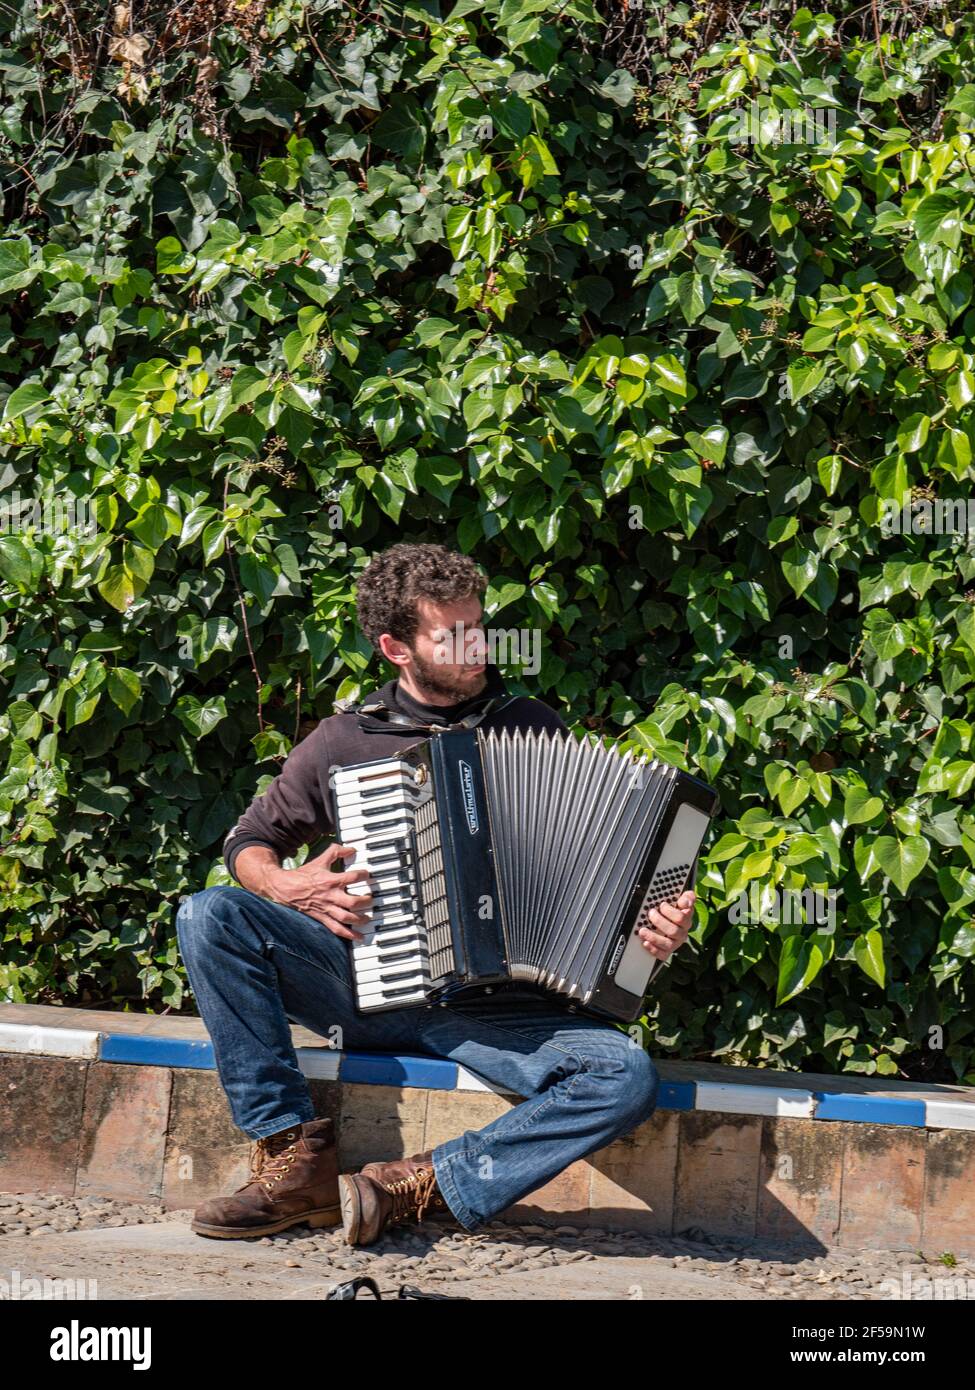 A busker playing an accordion in the city centre of Seville Spain Stock Photo